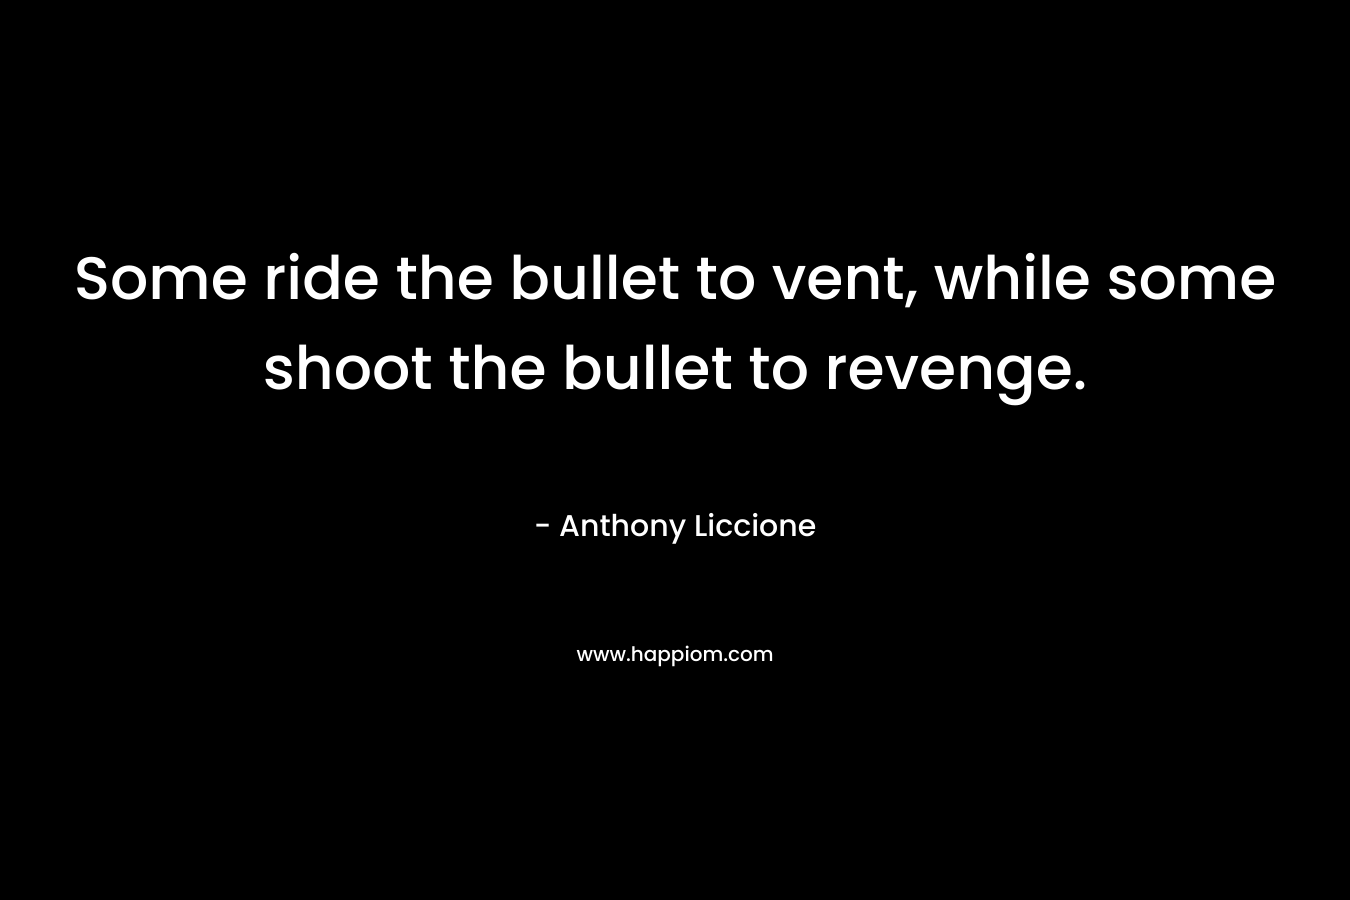 Some ride the bullet to vent, while some shoot the bullet to revenge. – Anthony Liccione